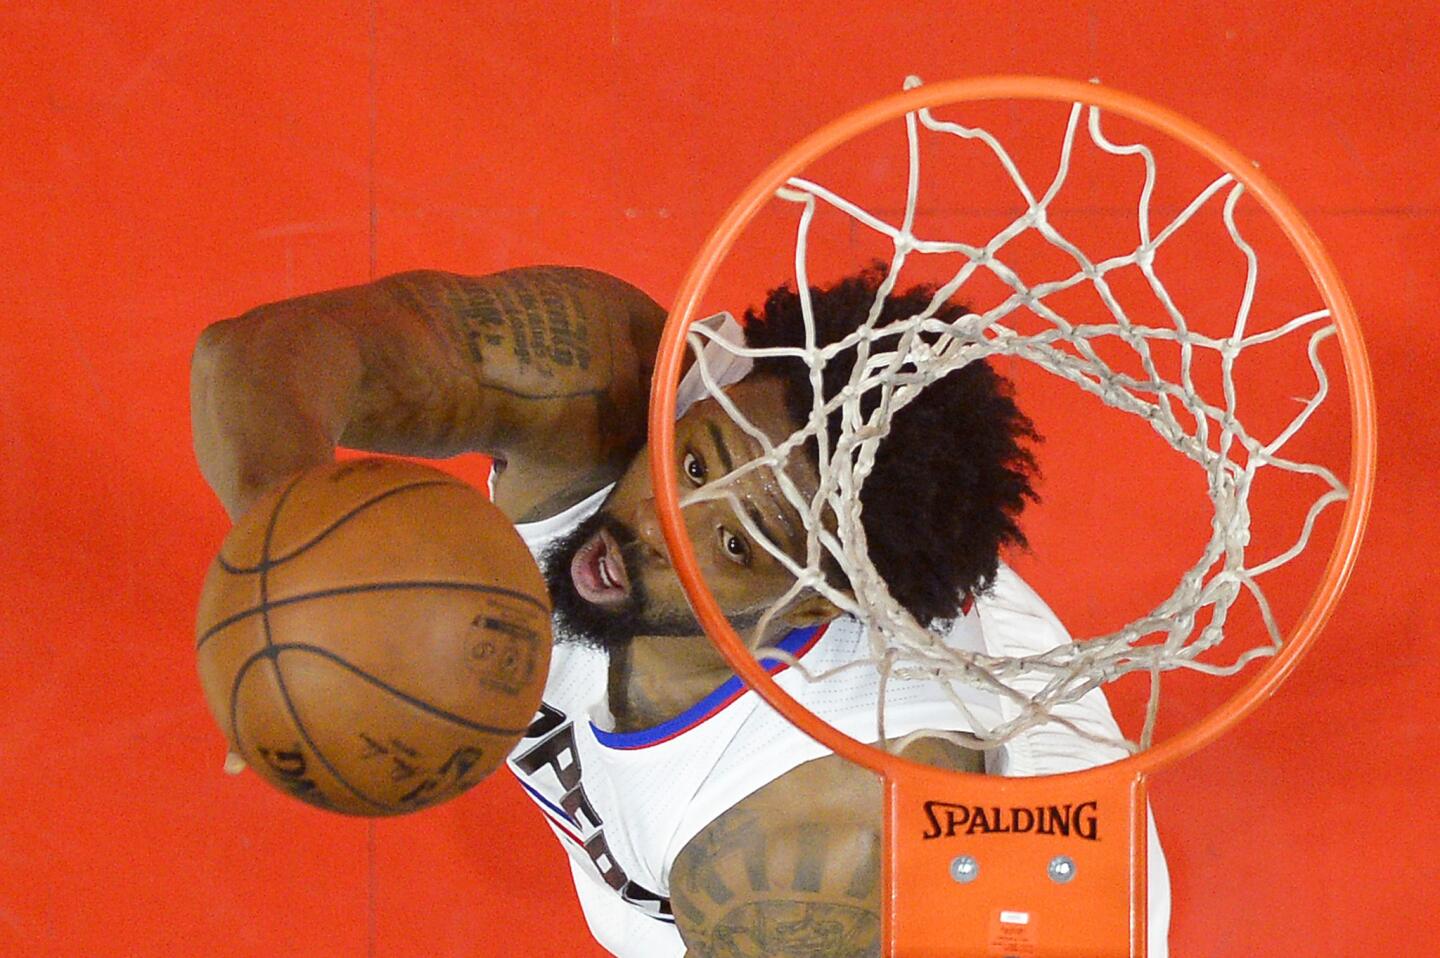 Los Angeles Clippers center DeAndre Jordan shoots during the first half against the Minnesota Timberwolves on Wednesday.